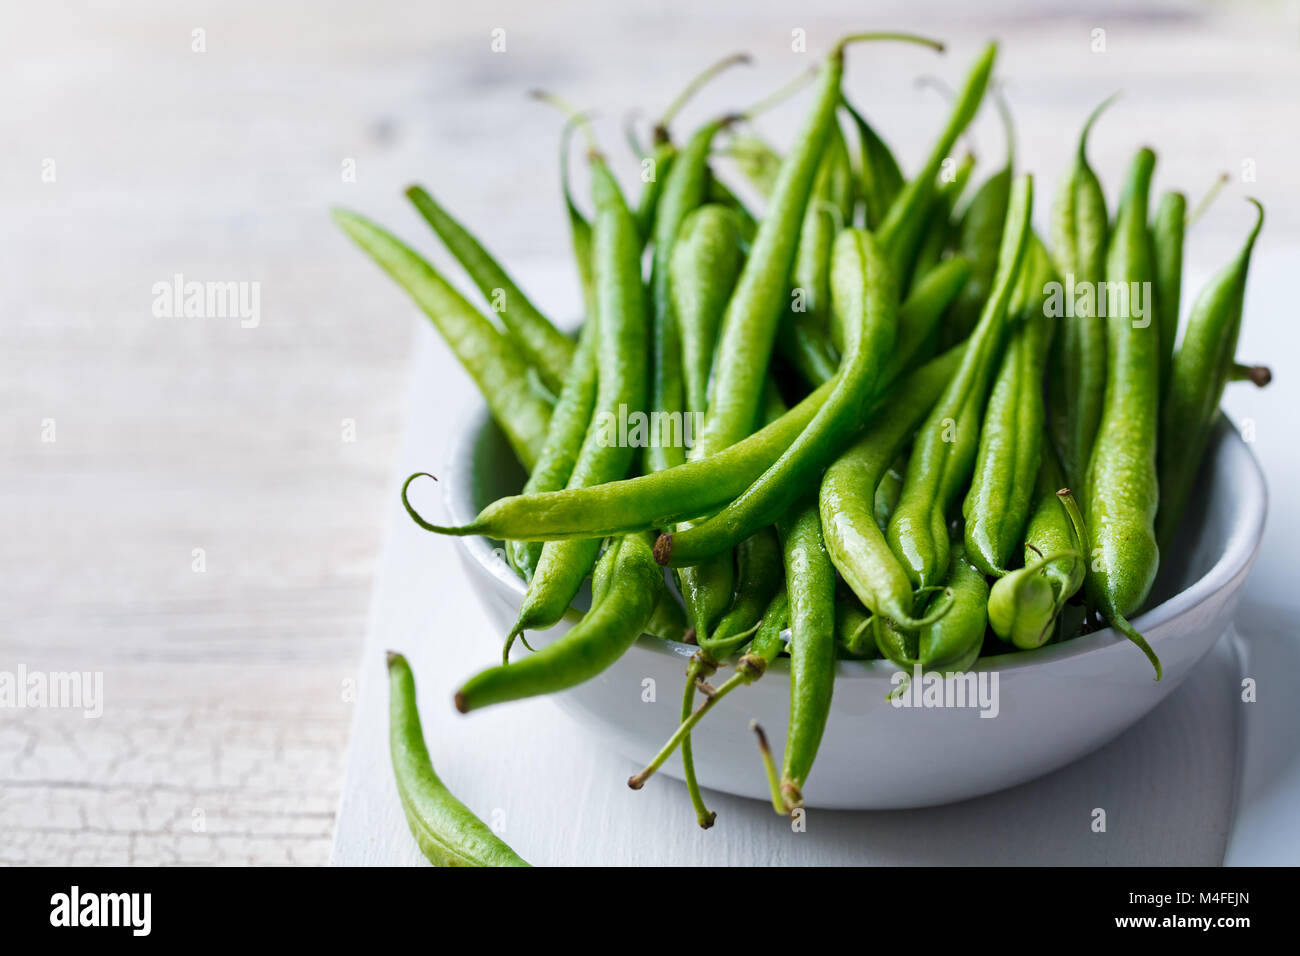 Green beans in white bowl on cutting board. Stock Photo